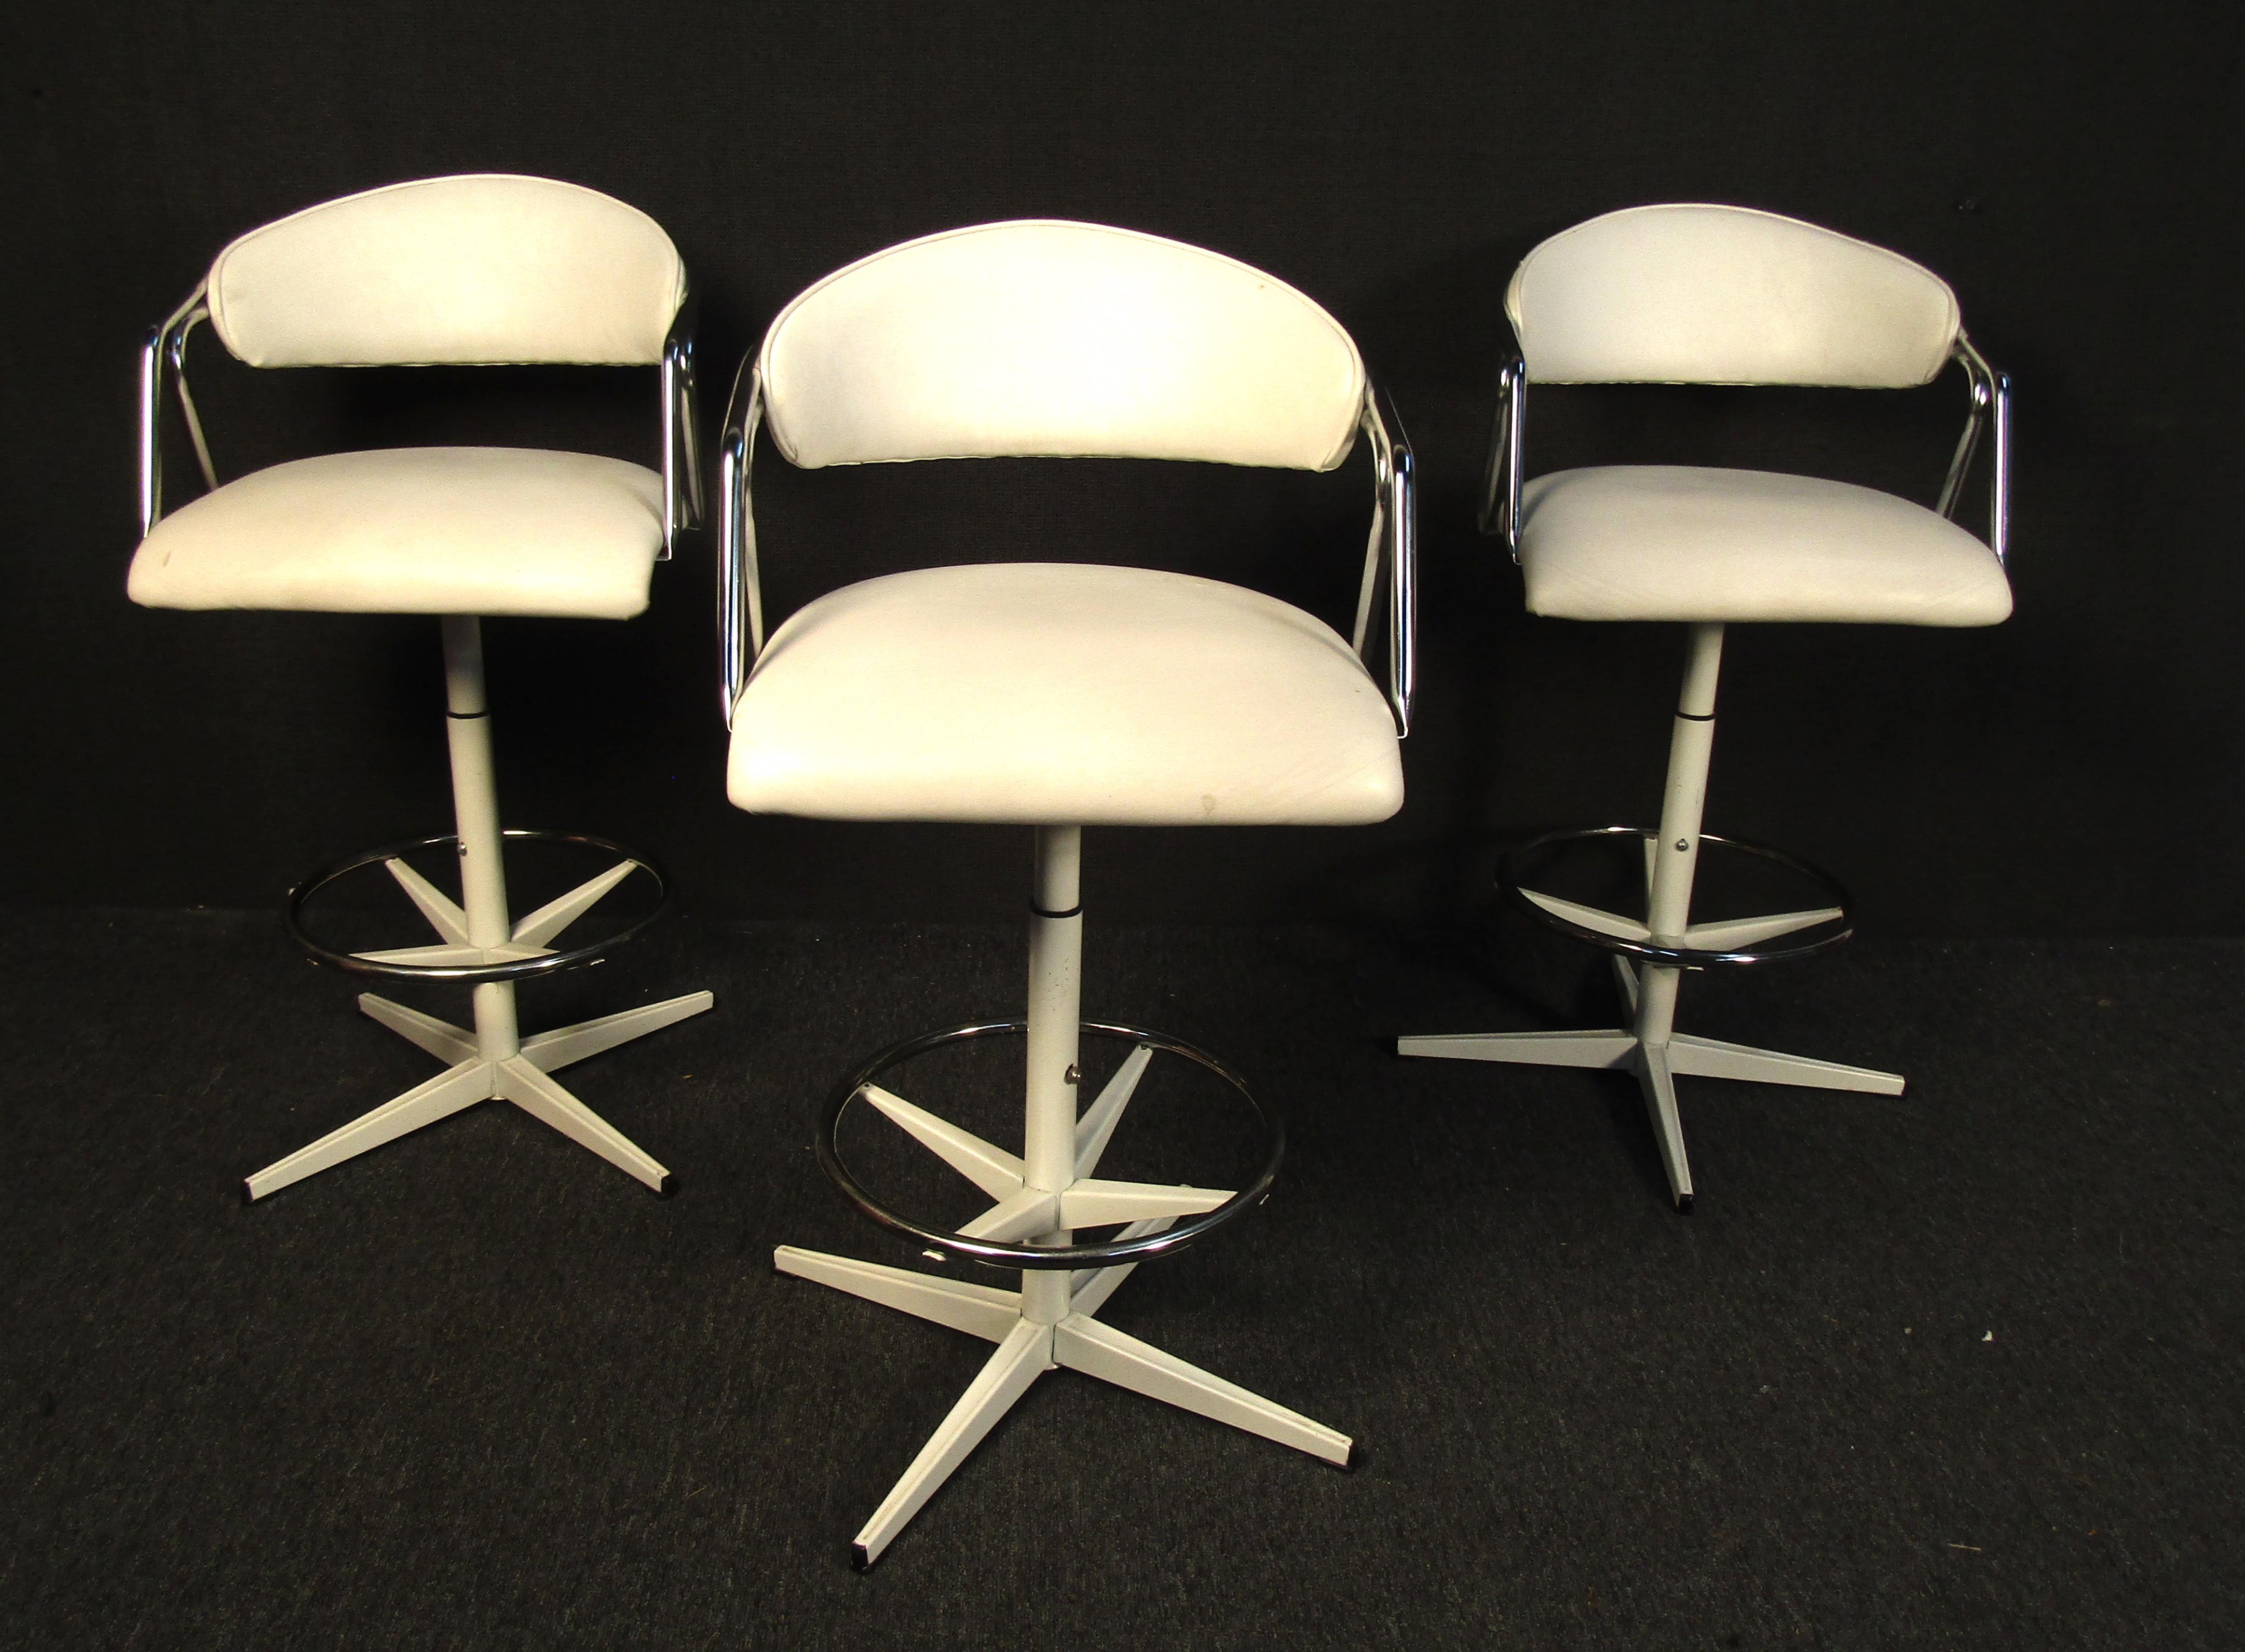 Set of three vintage modern barstools. Upholstered in white vinyl, these unique retro swivel barstools with chrome accents would make a beautiful addition to any bar. 

Please confirm item location (NY or NJ).